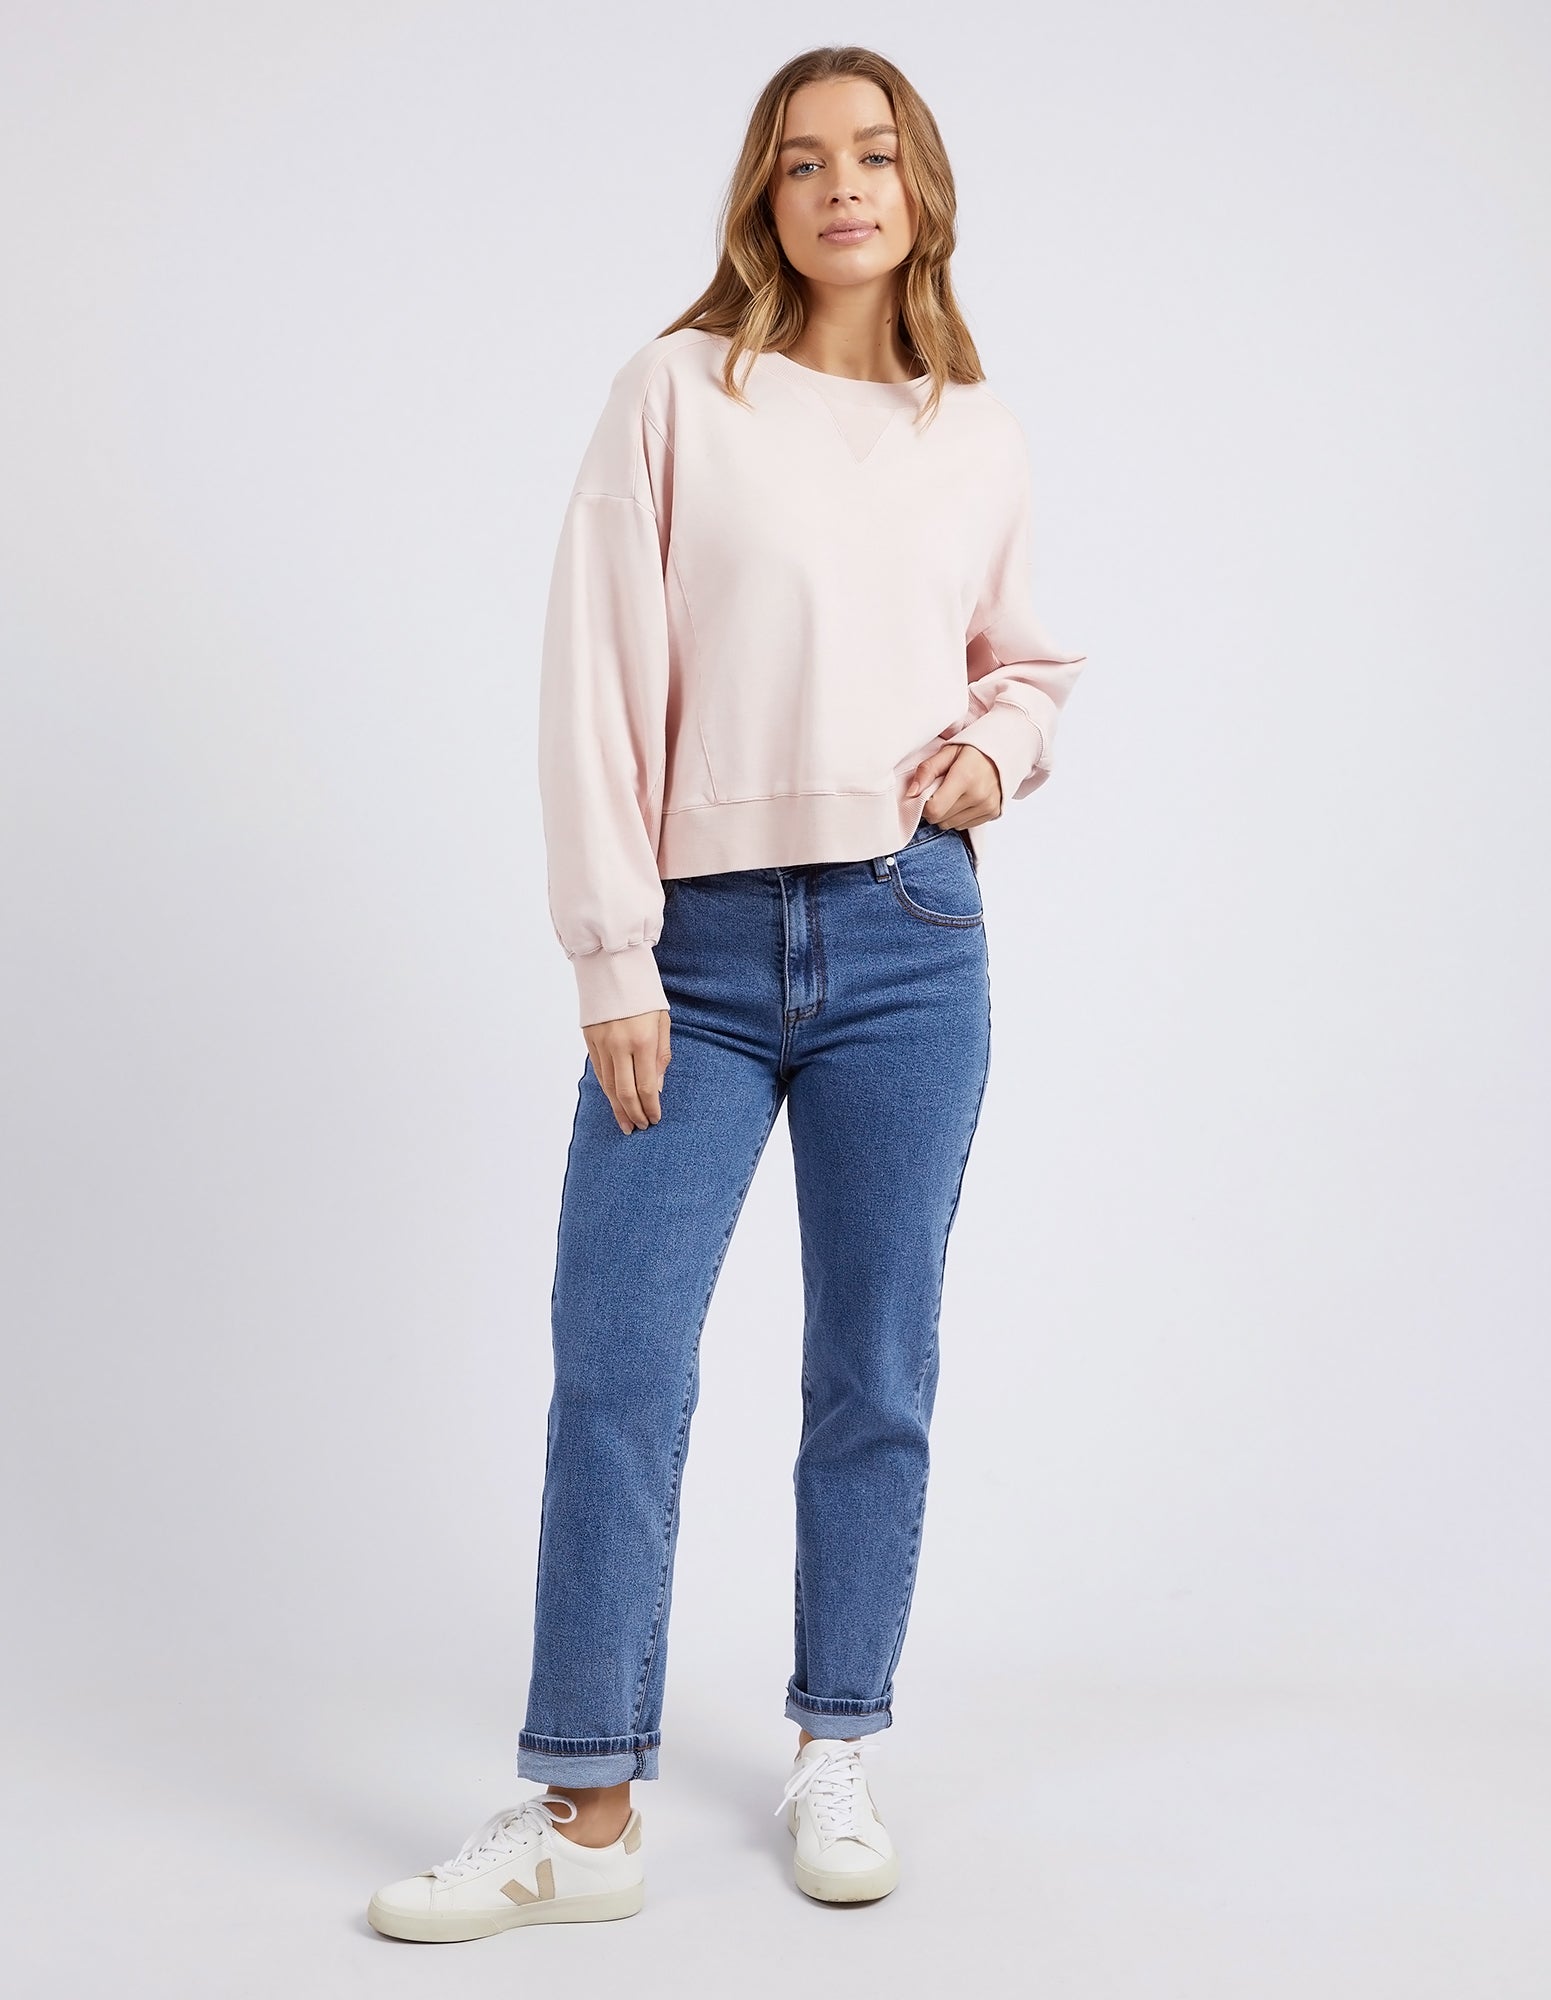 FOXWOOD Clothing II CECILE Crew - Pale Pink